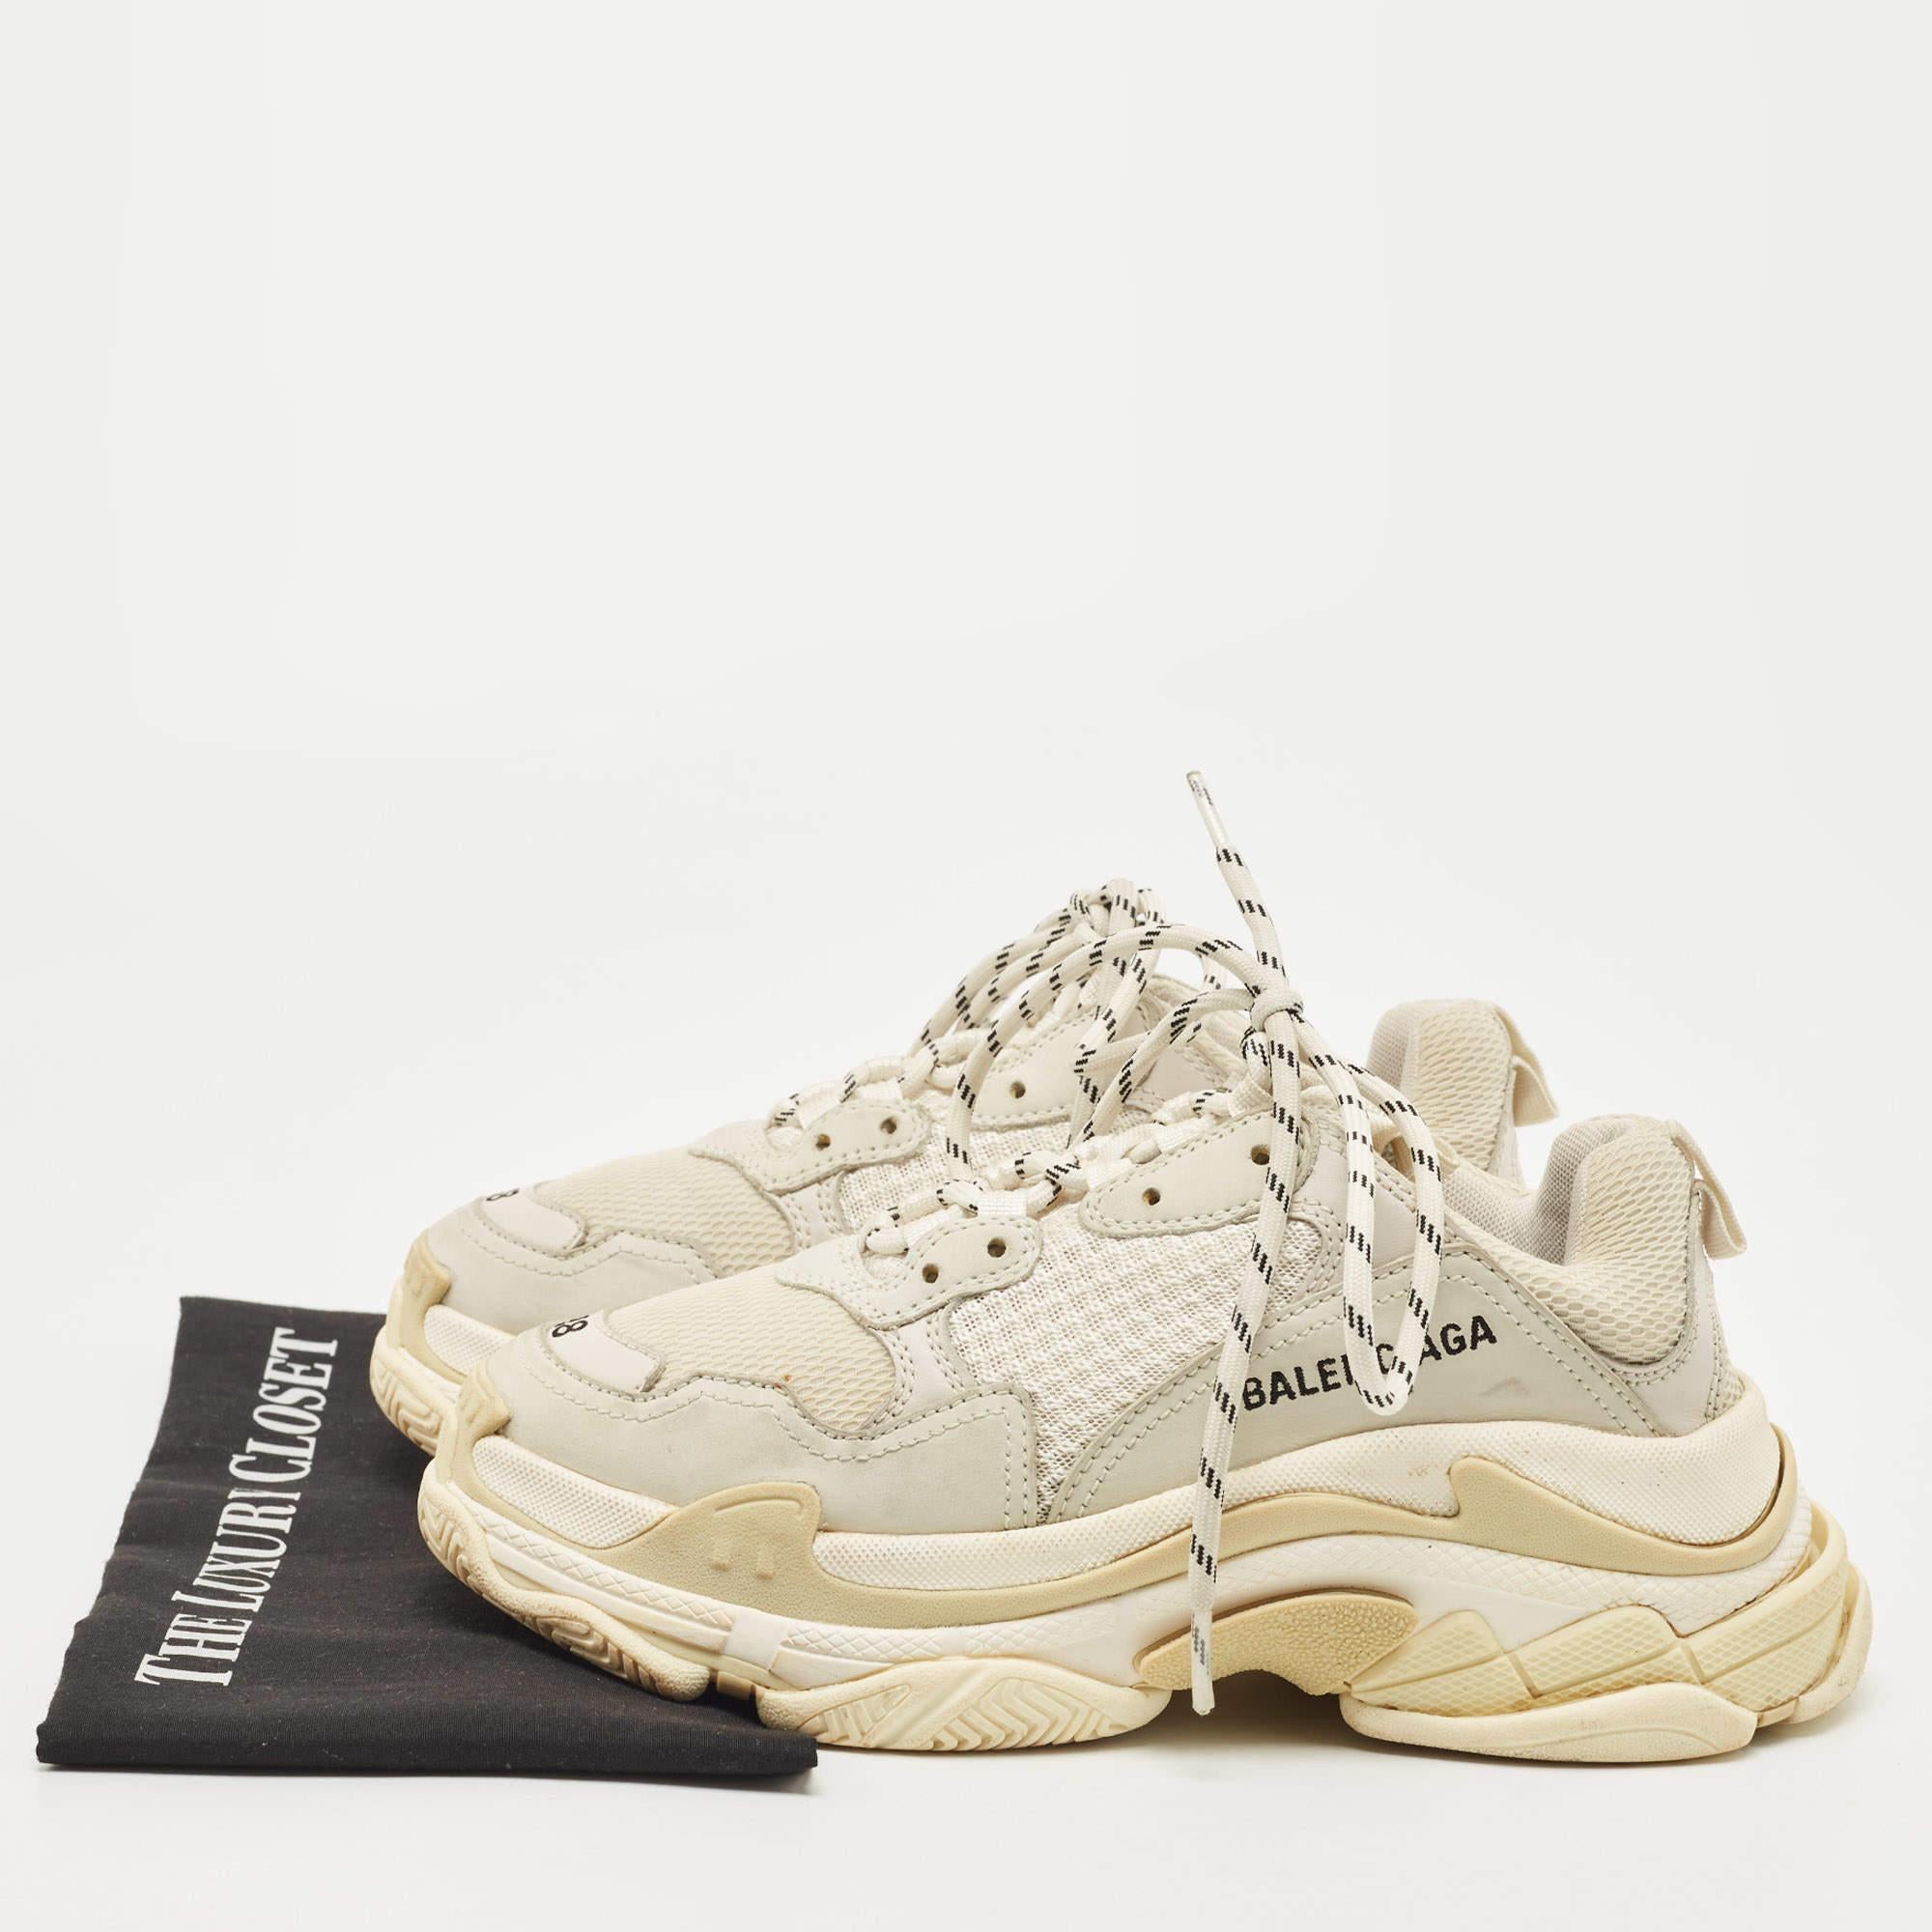 Balenciaga White/Grey Mesh and Leather Triple S Sneakers Size 38 4